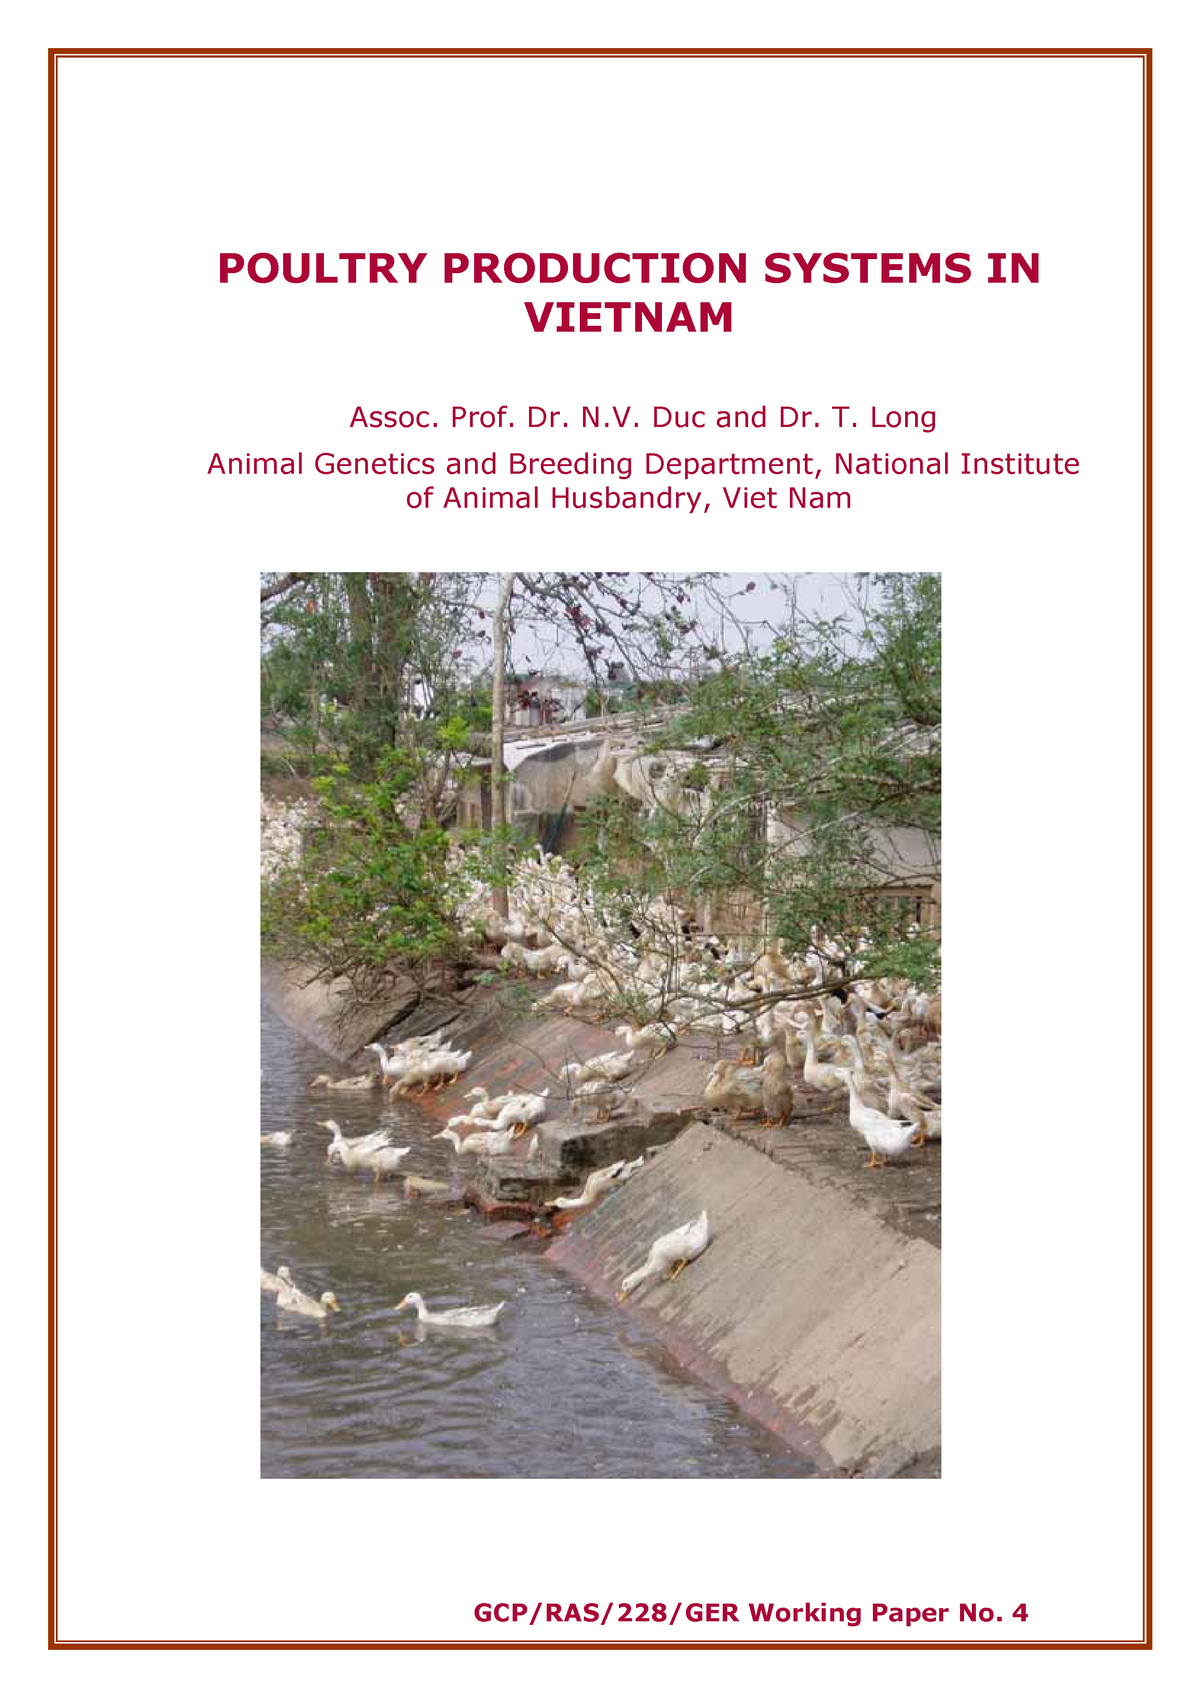 Al693e00 - Nghiên cứu marketing - POULTRY PRODUCTION SYSTEMS IN VIETNAM  Assoc. Prof. Dr. N. Duc and - Studocu